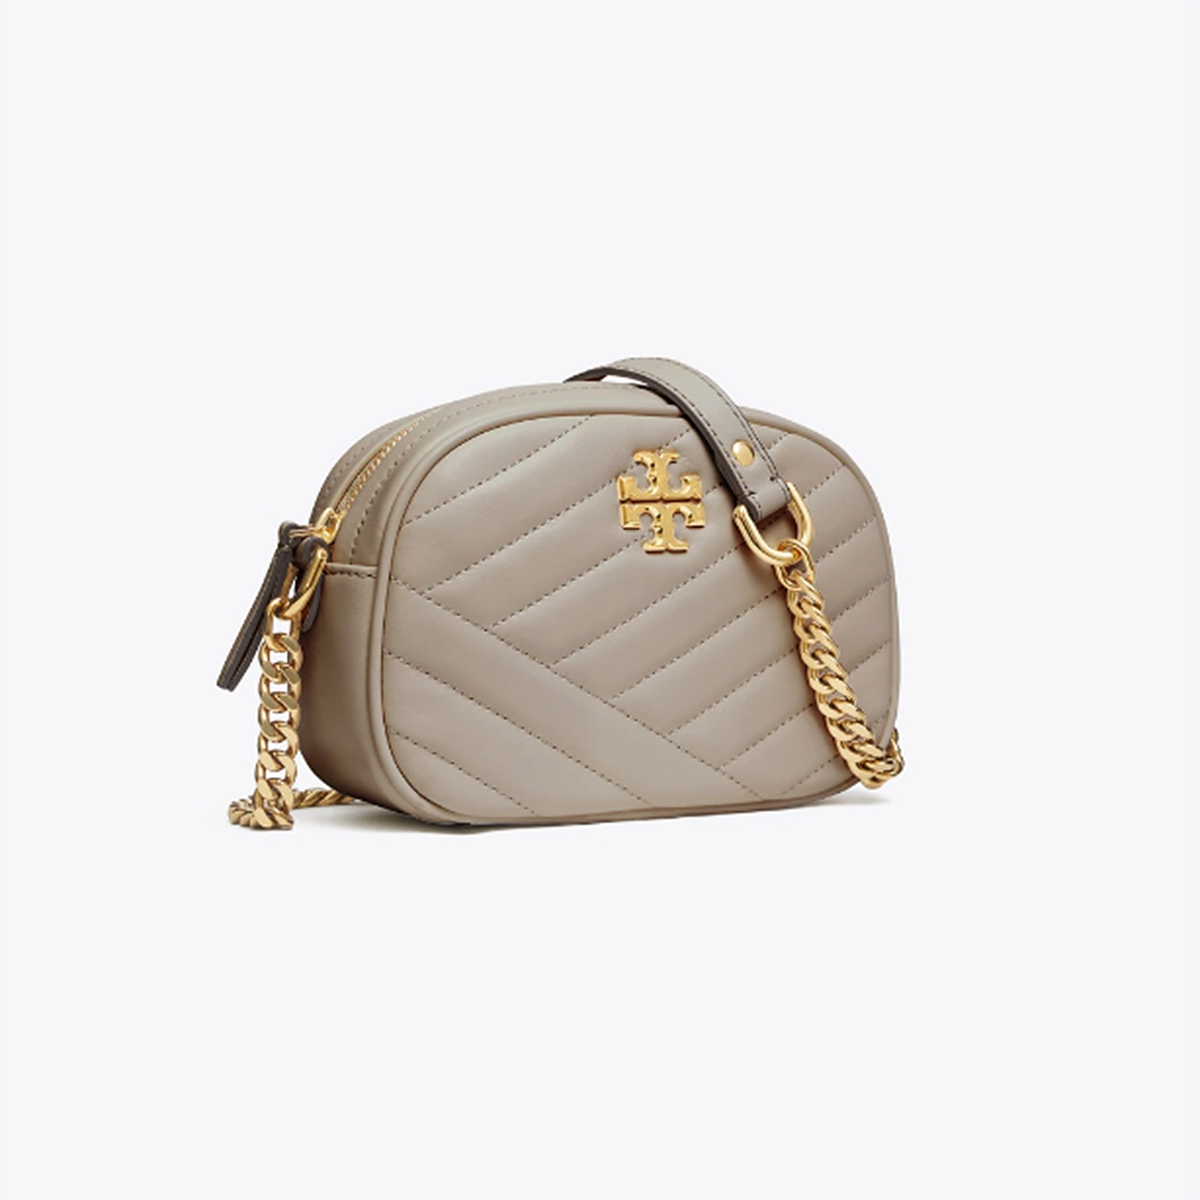 Tory Burch Quilted Crossbody Bag - Katie's Bliss